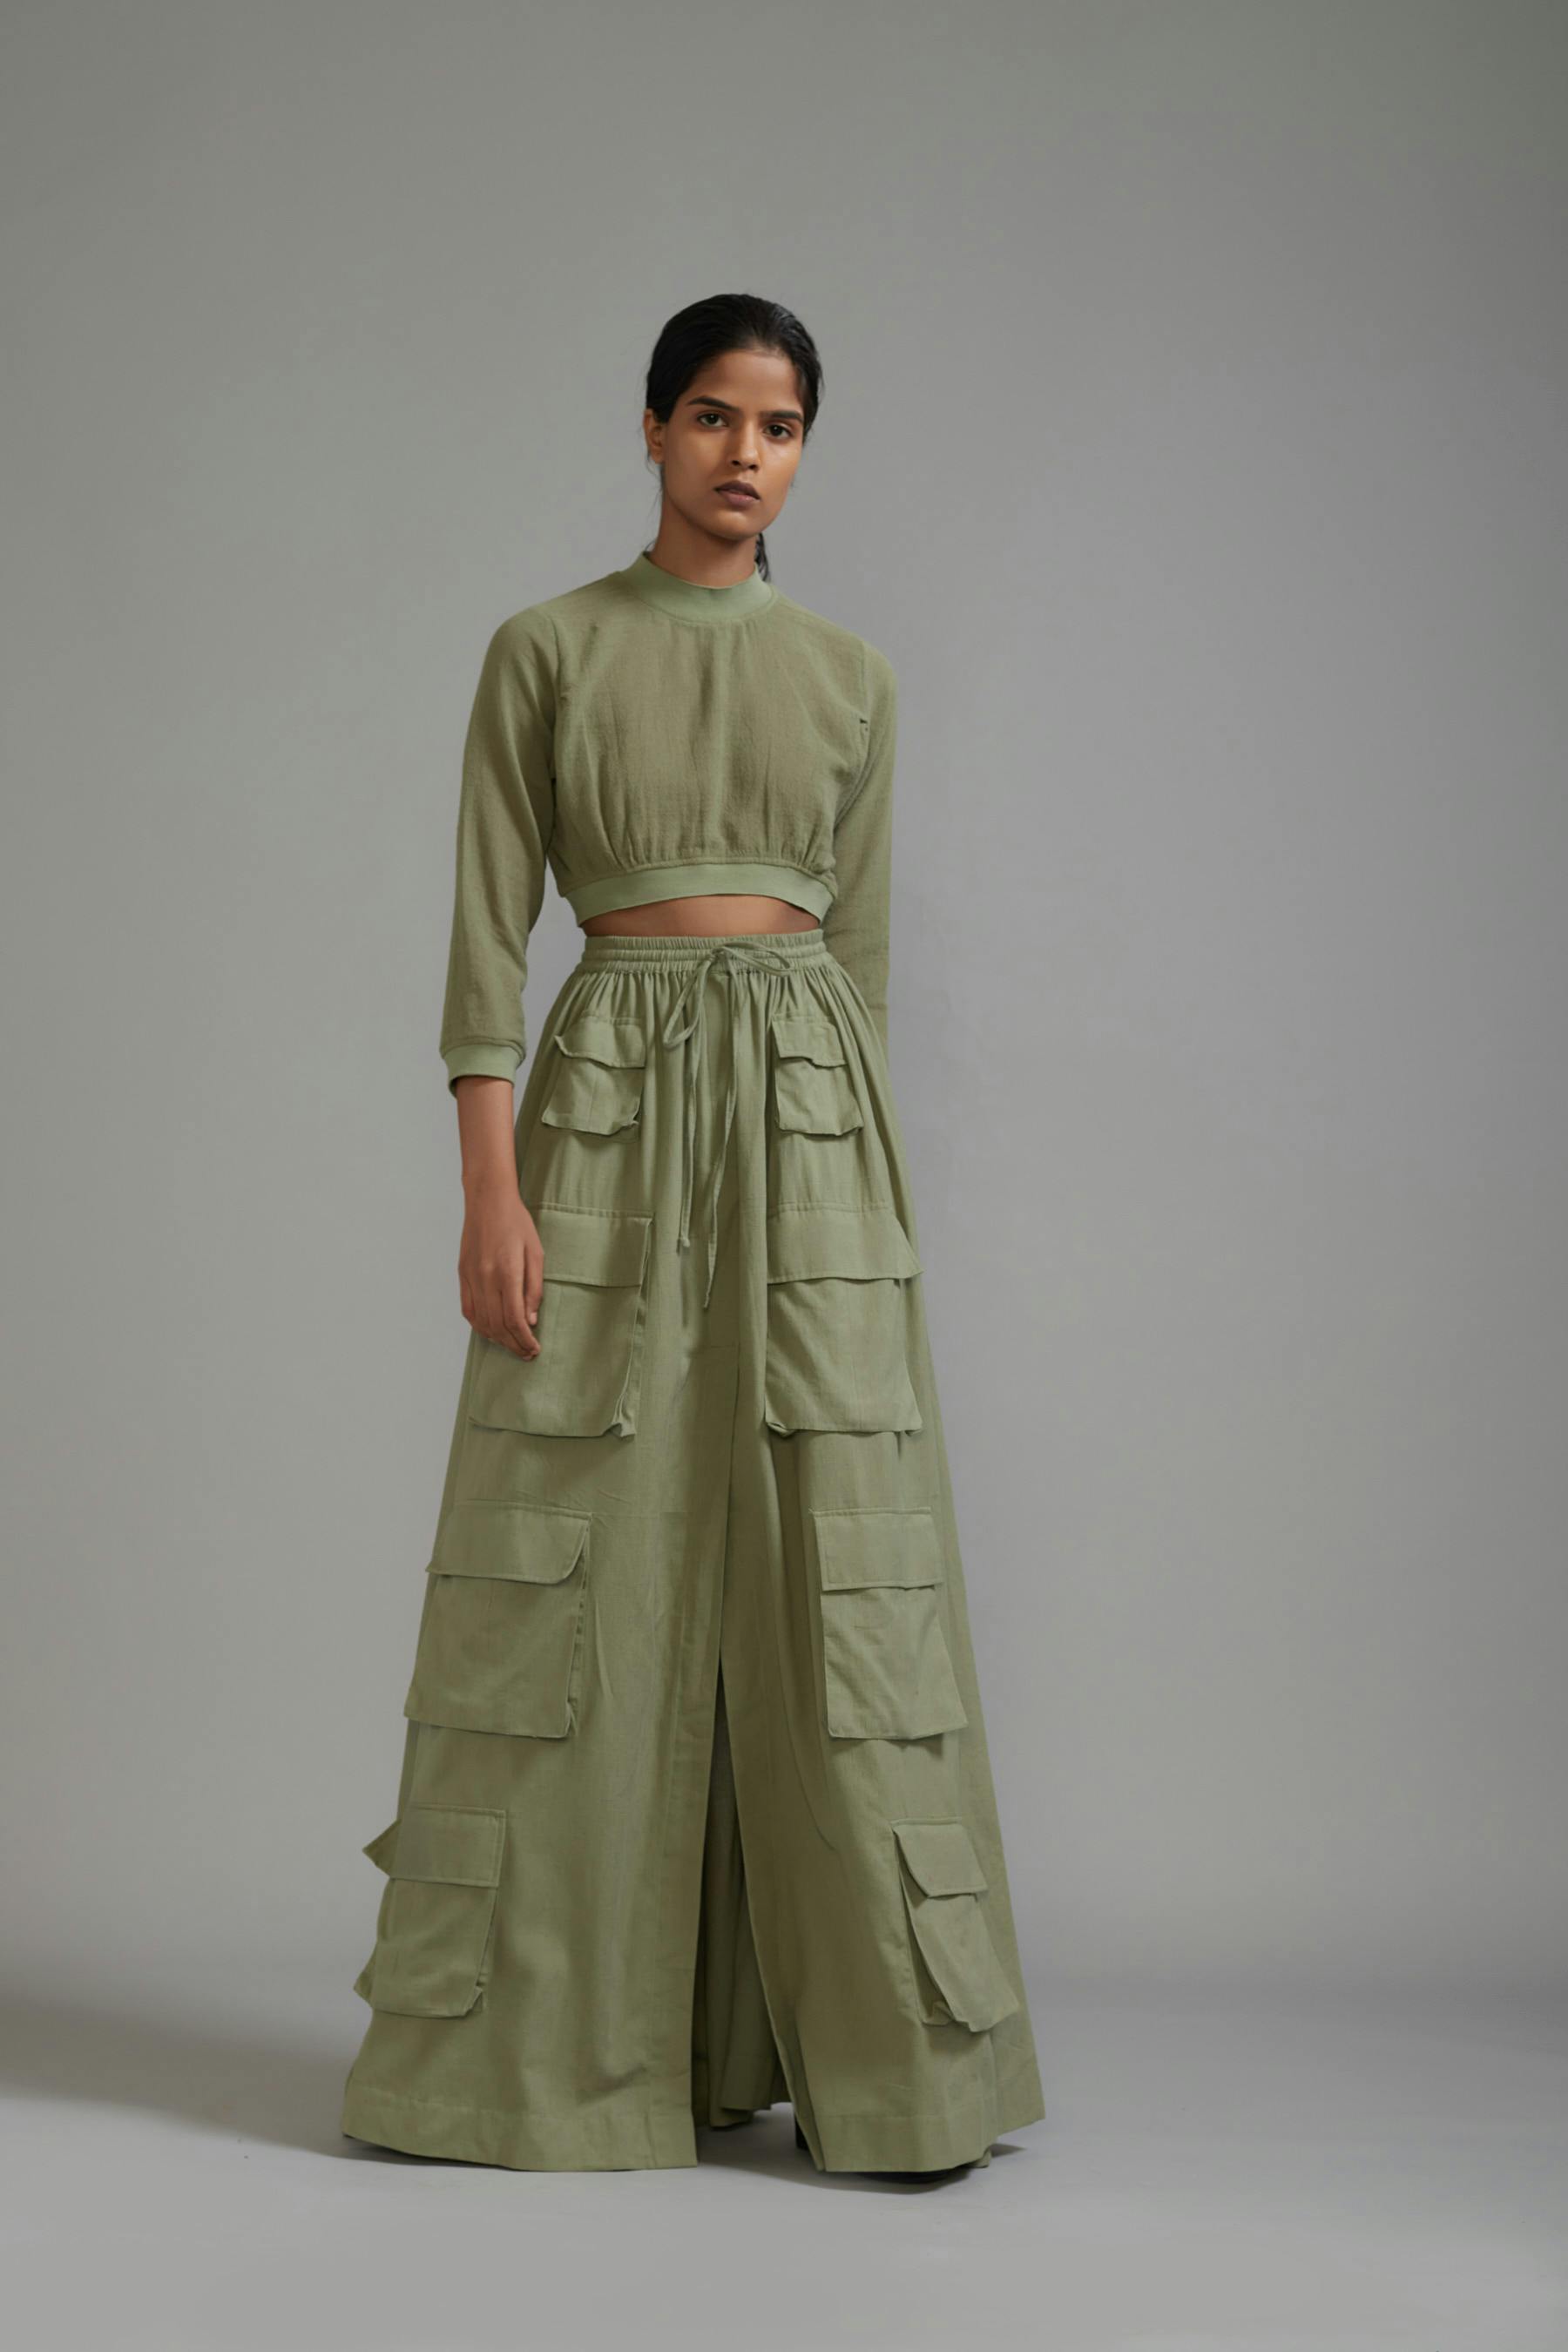 Thumbnail preview #1 for Green Crop Top and Cargo Skirt Set